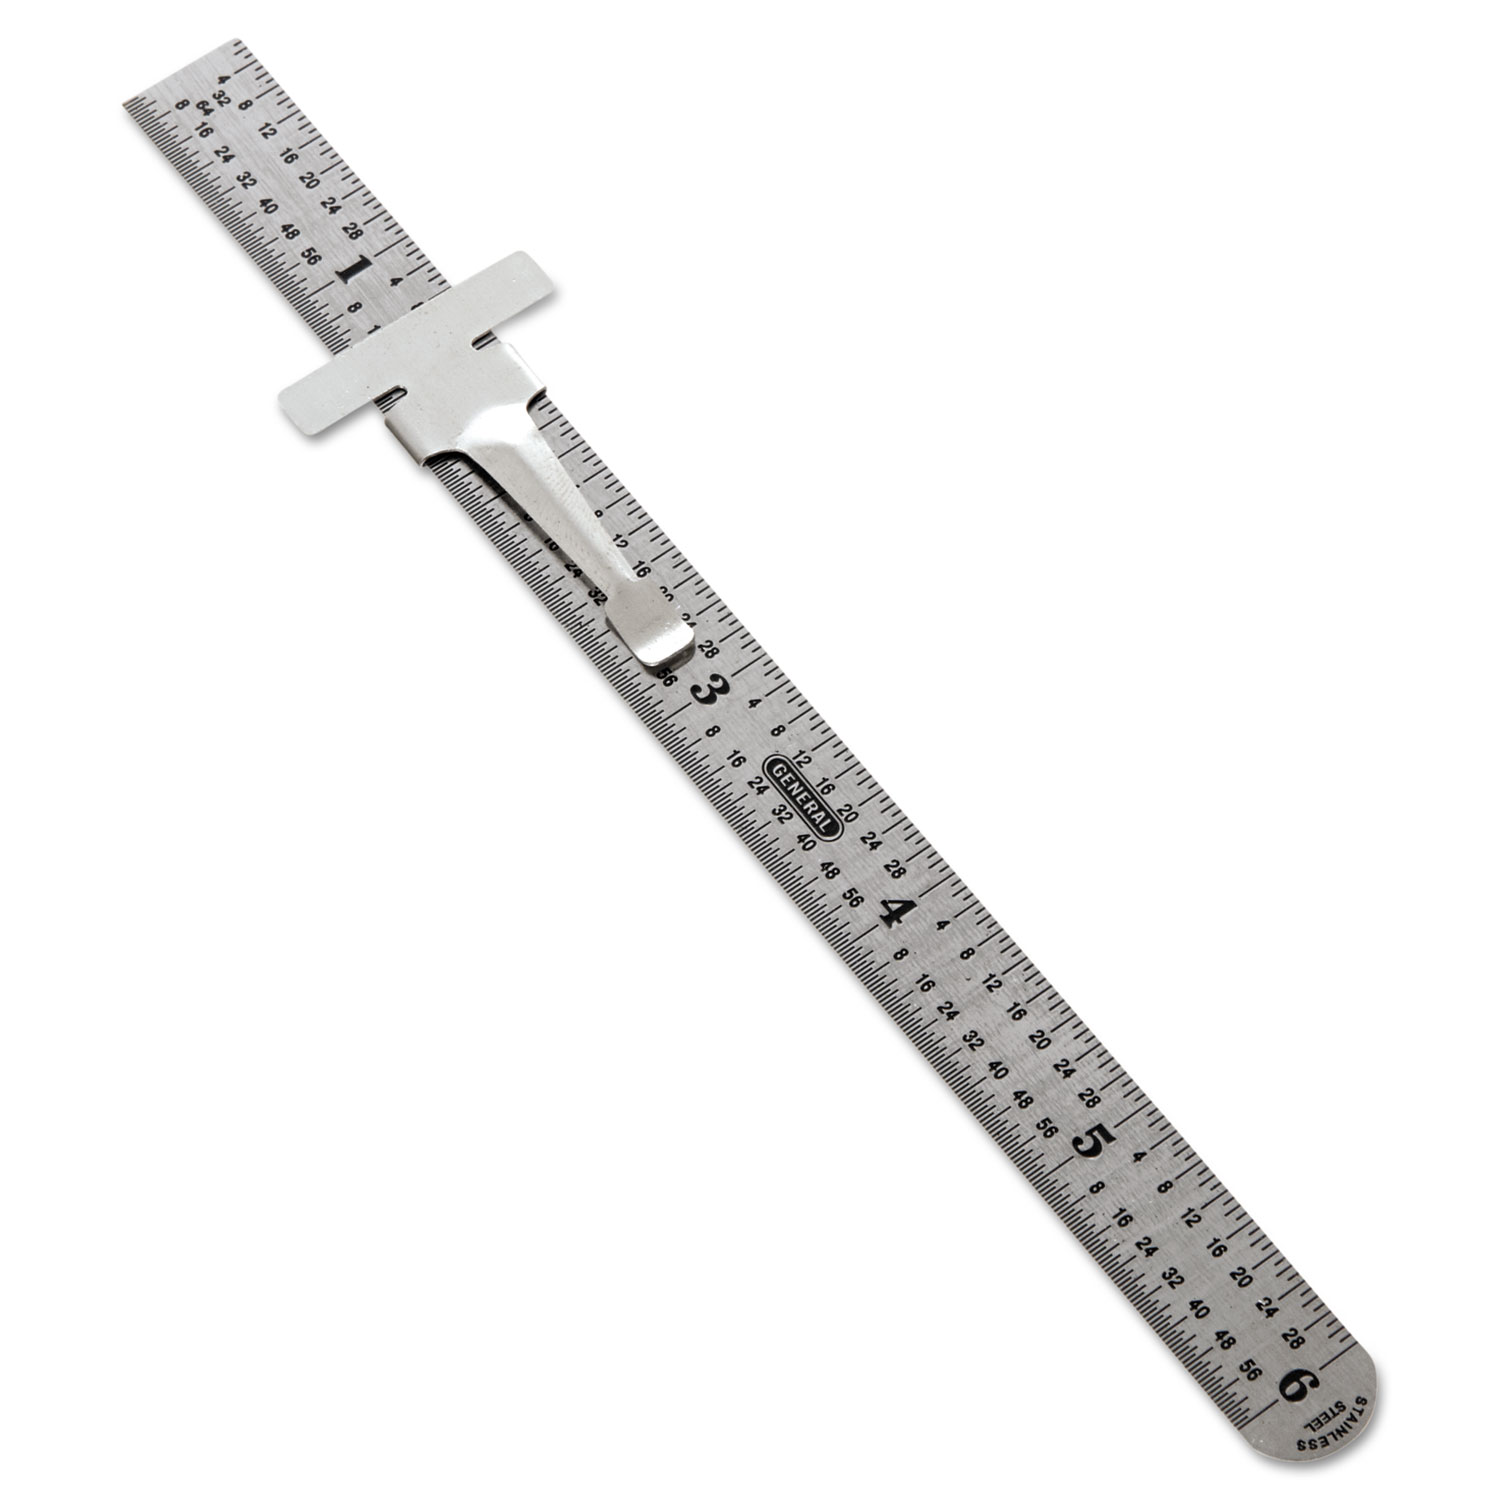 Precision Stainless Steel Ruler by General® GTI3001 ...